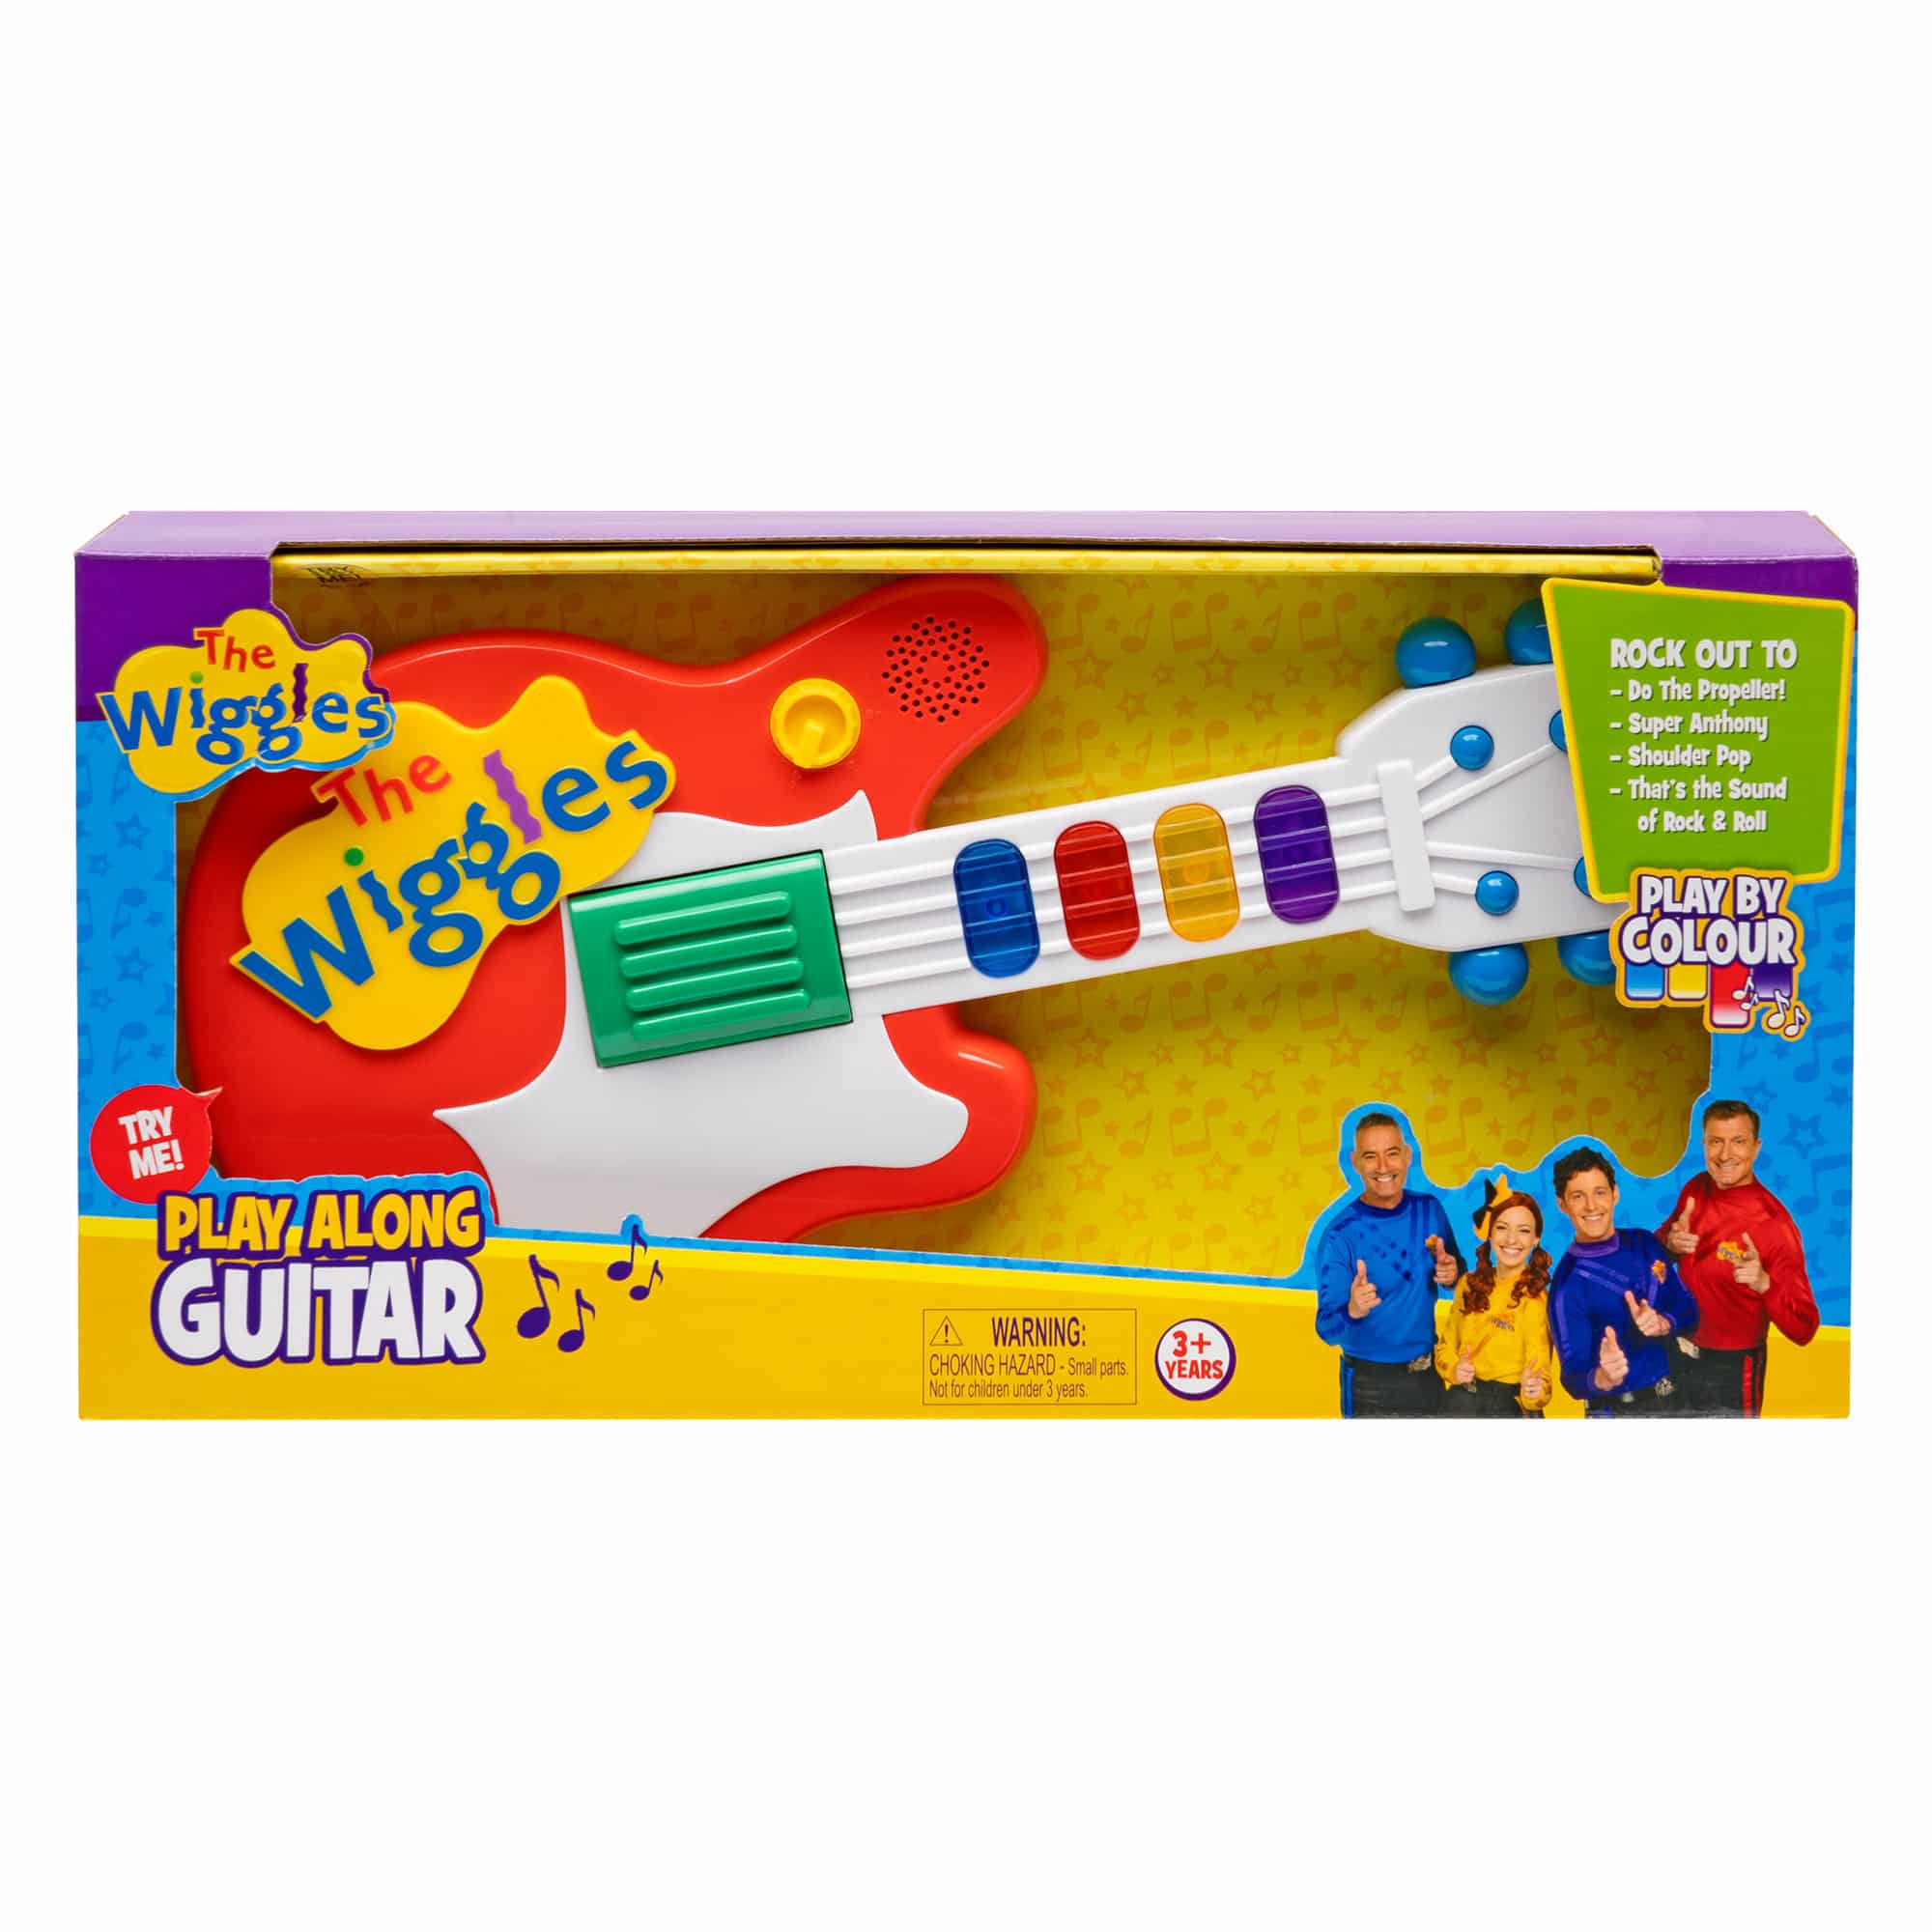 The Wiggles - Play Along Guitar